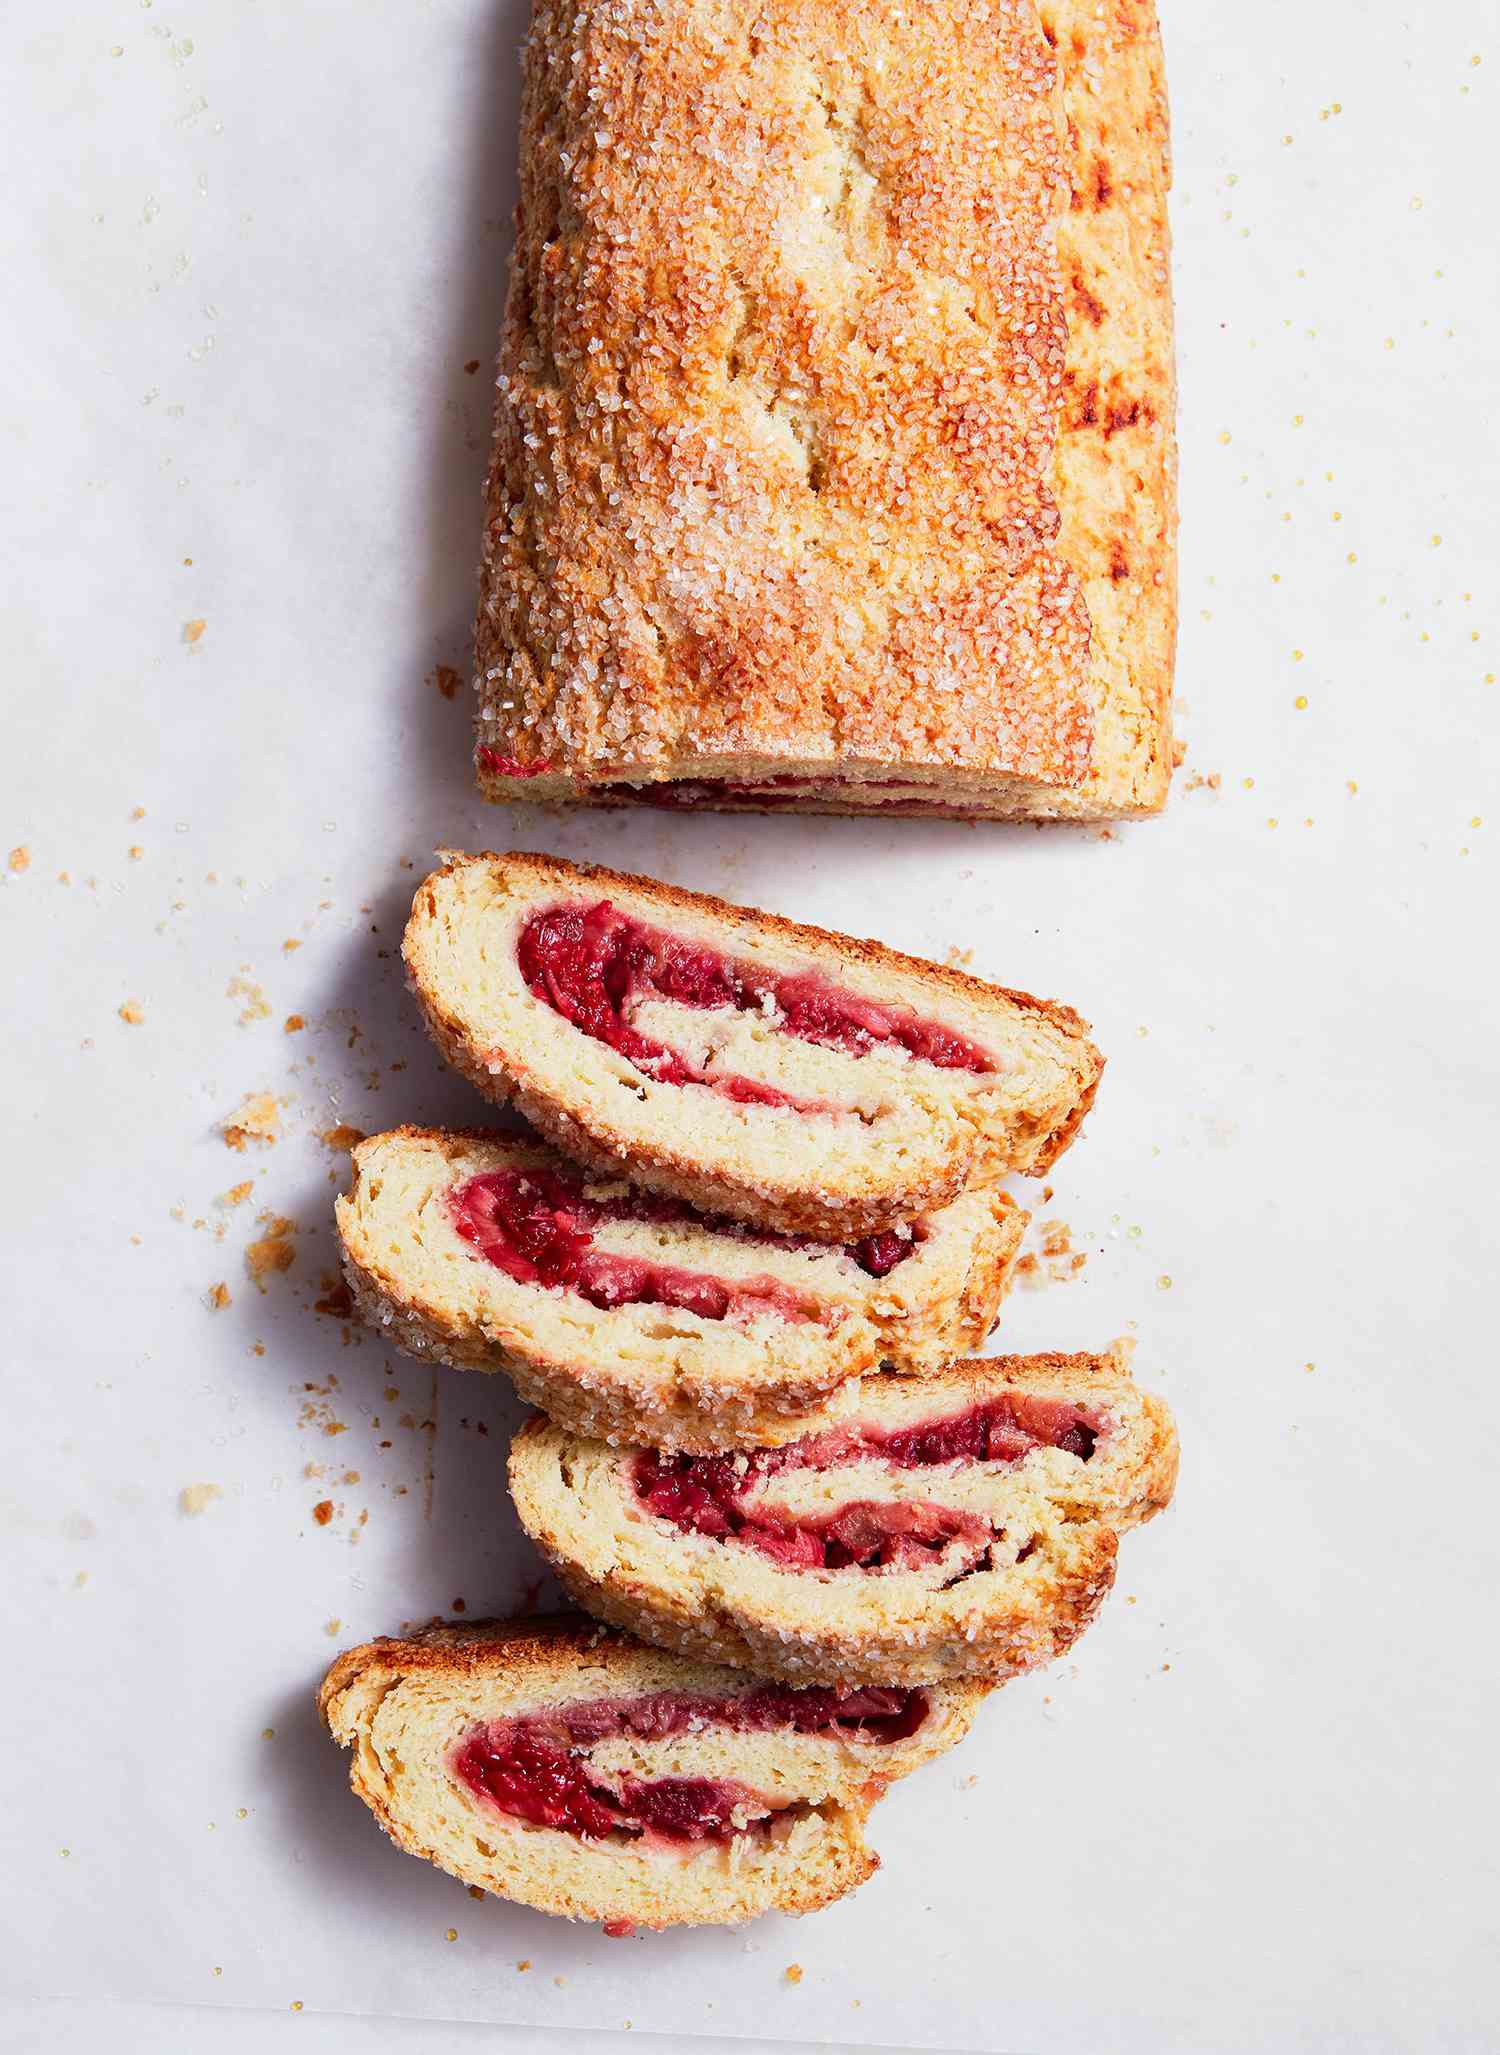 Biscuit-Jelly Roll with Rhubarb and Raspberries